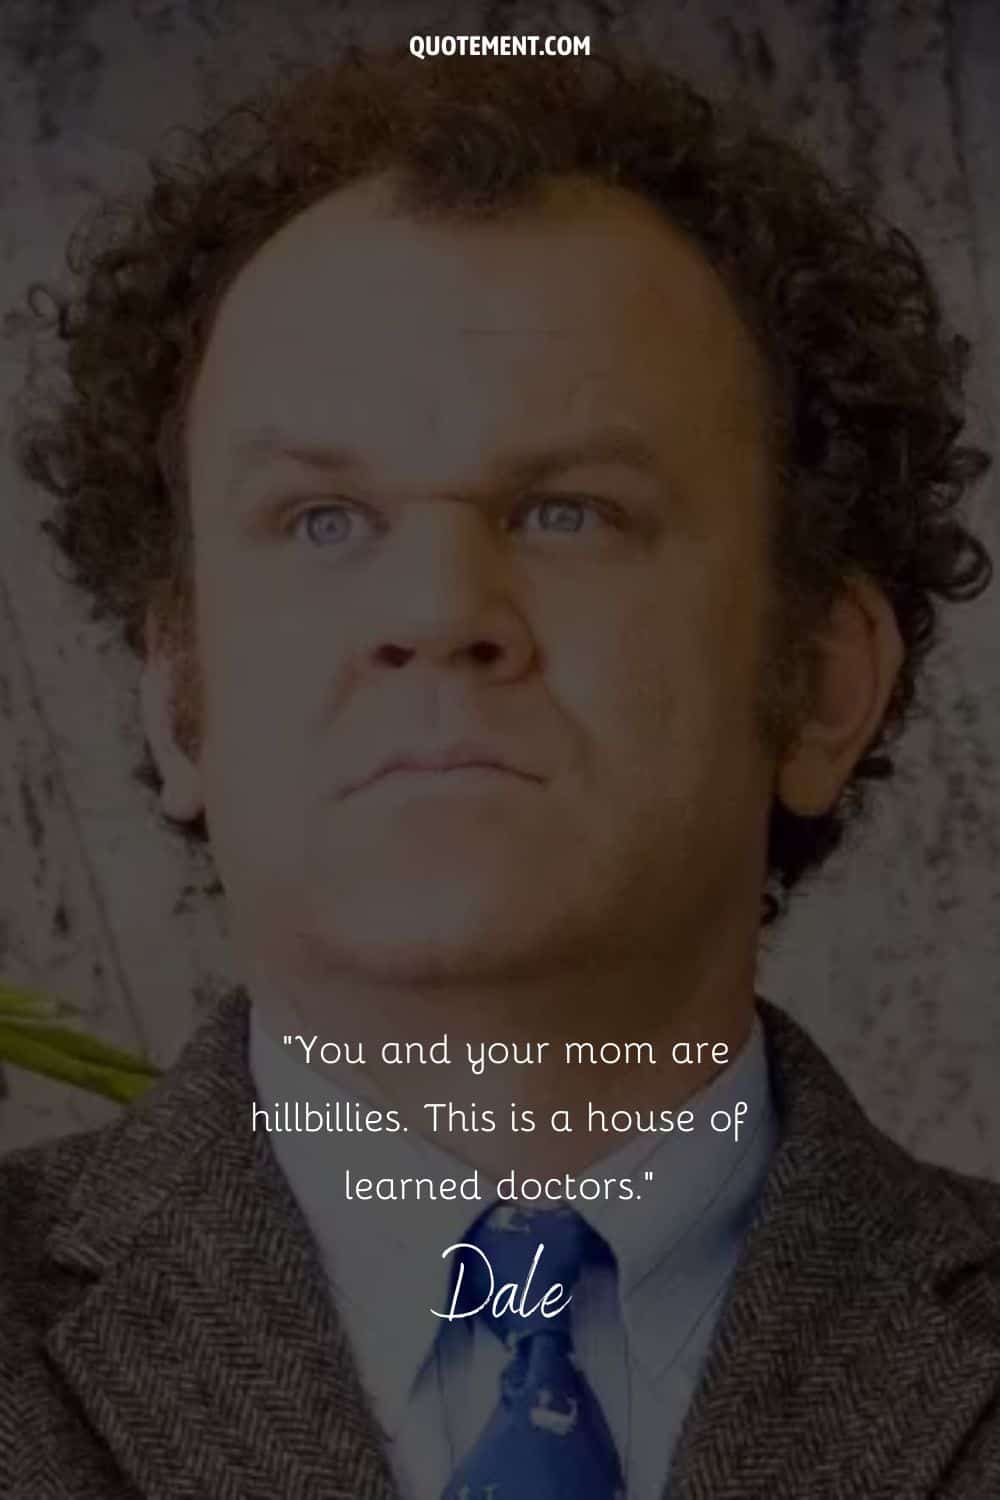 You and your mom are hillbillies. This is a house of learned doctors.